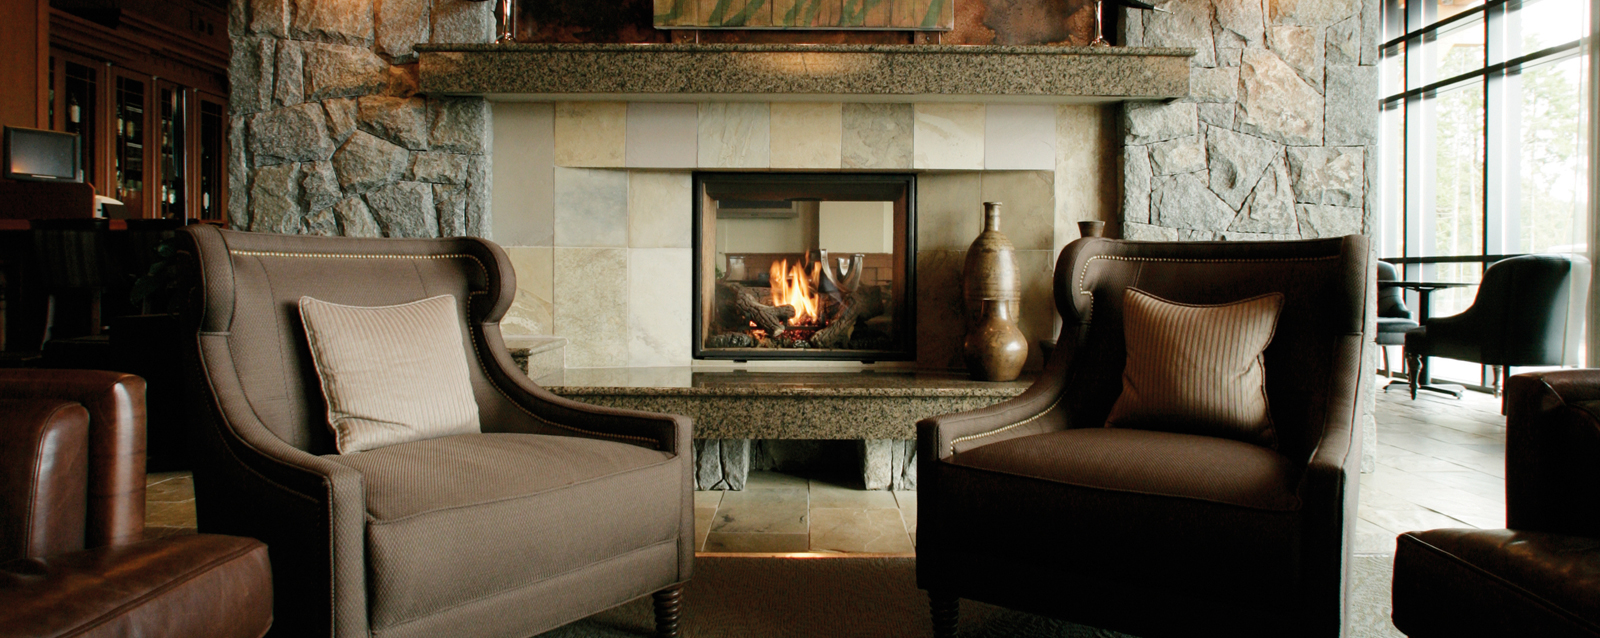 Fireplaces Unlimited Welcome Page, Wood Stoves Fireplaces Unlimited